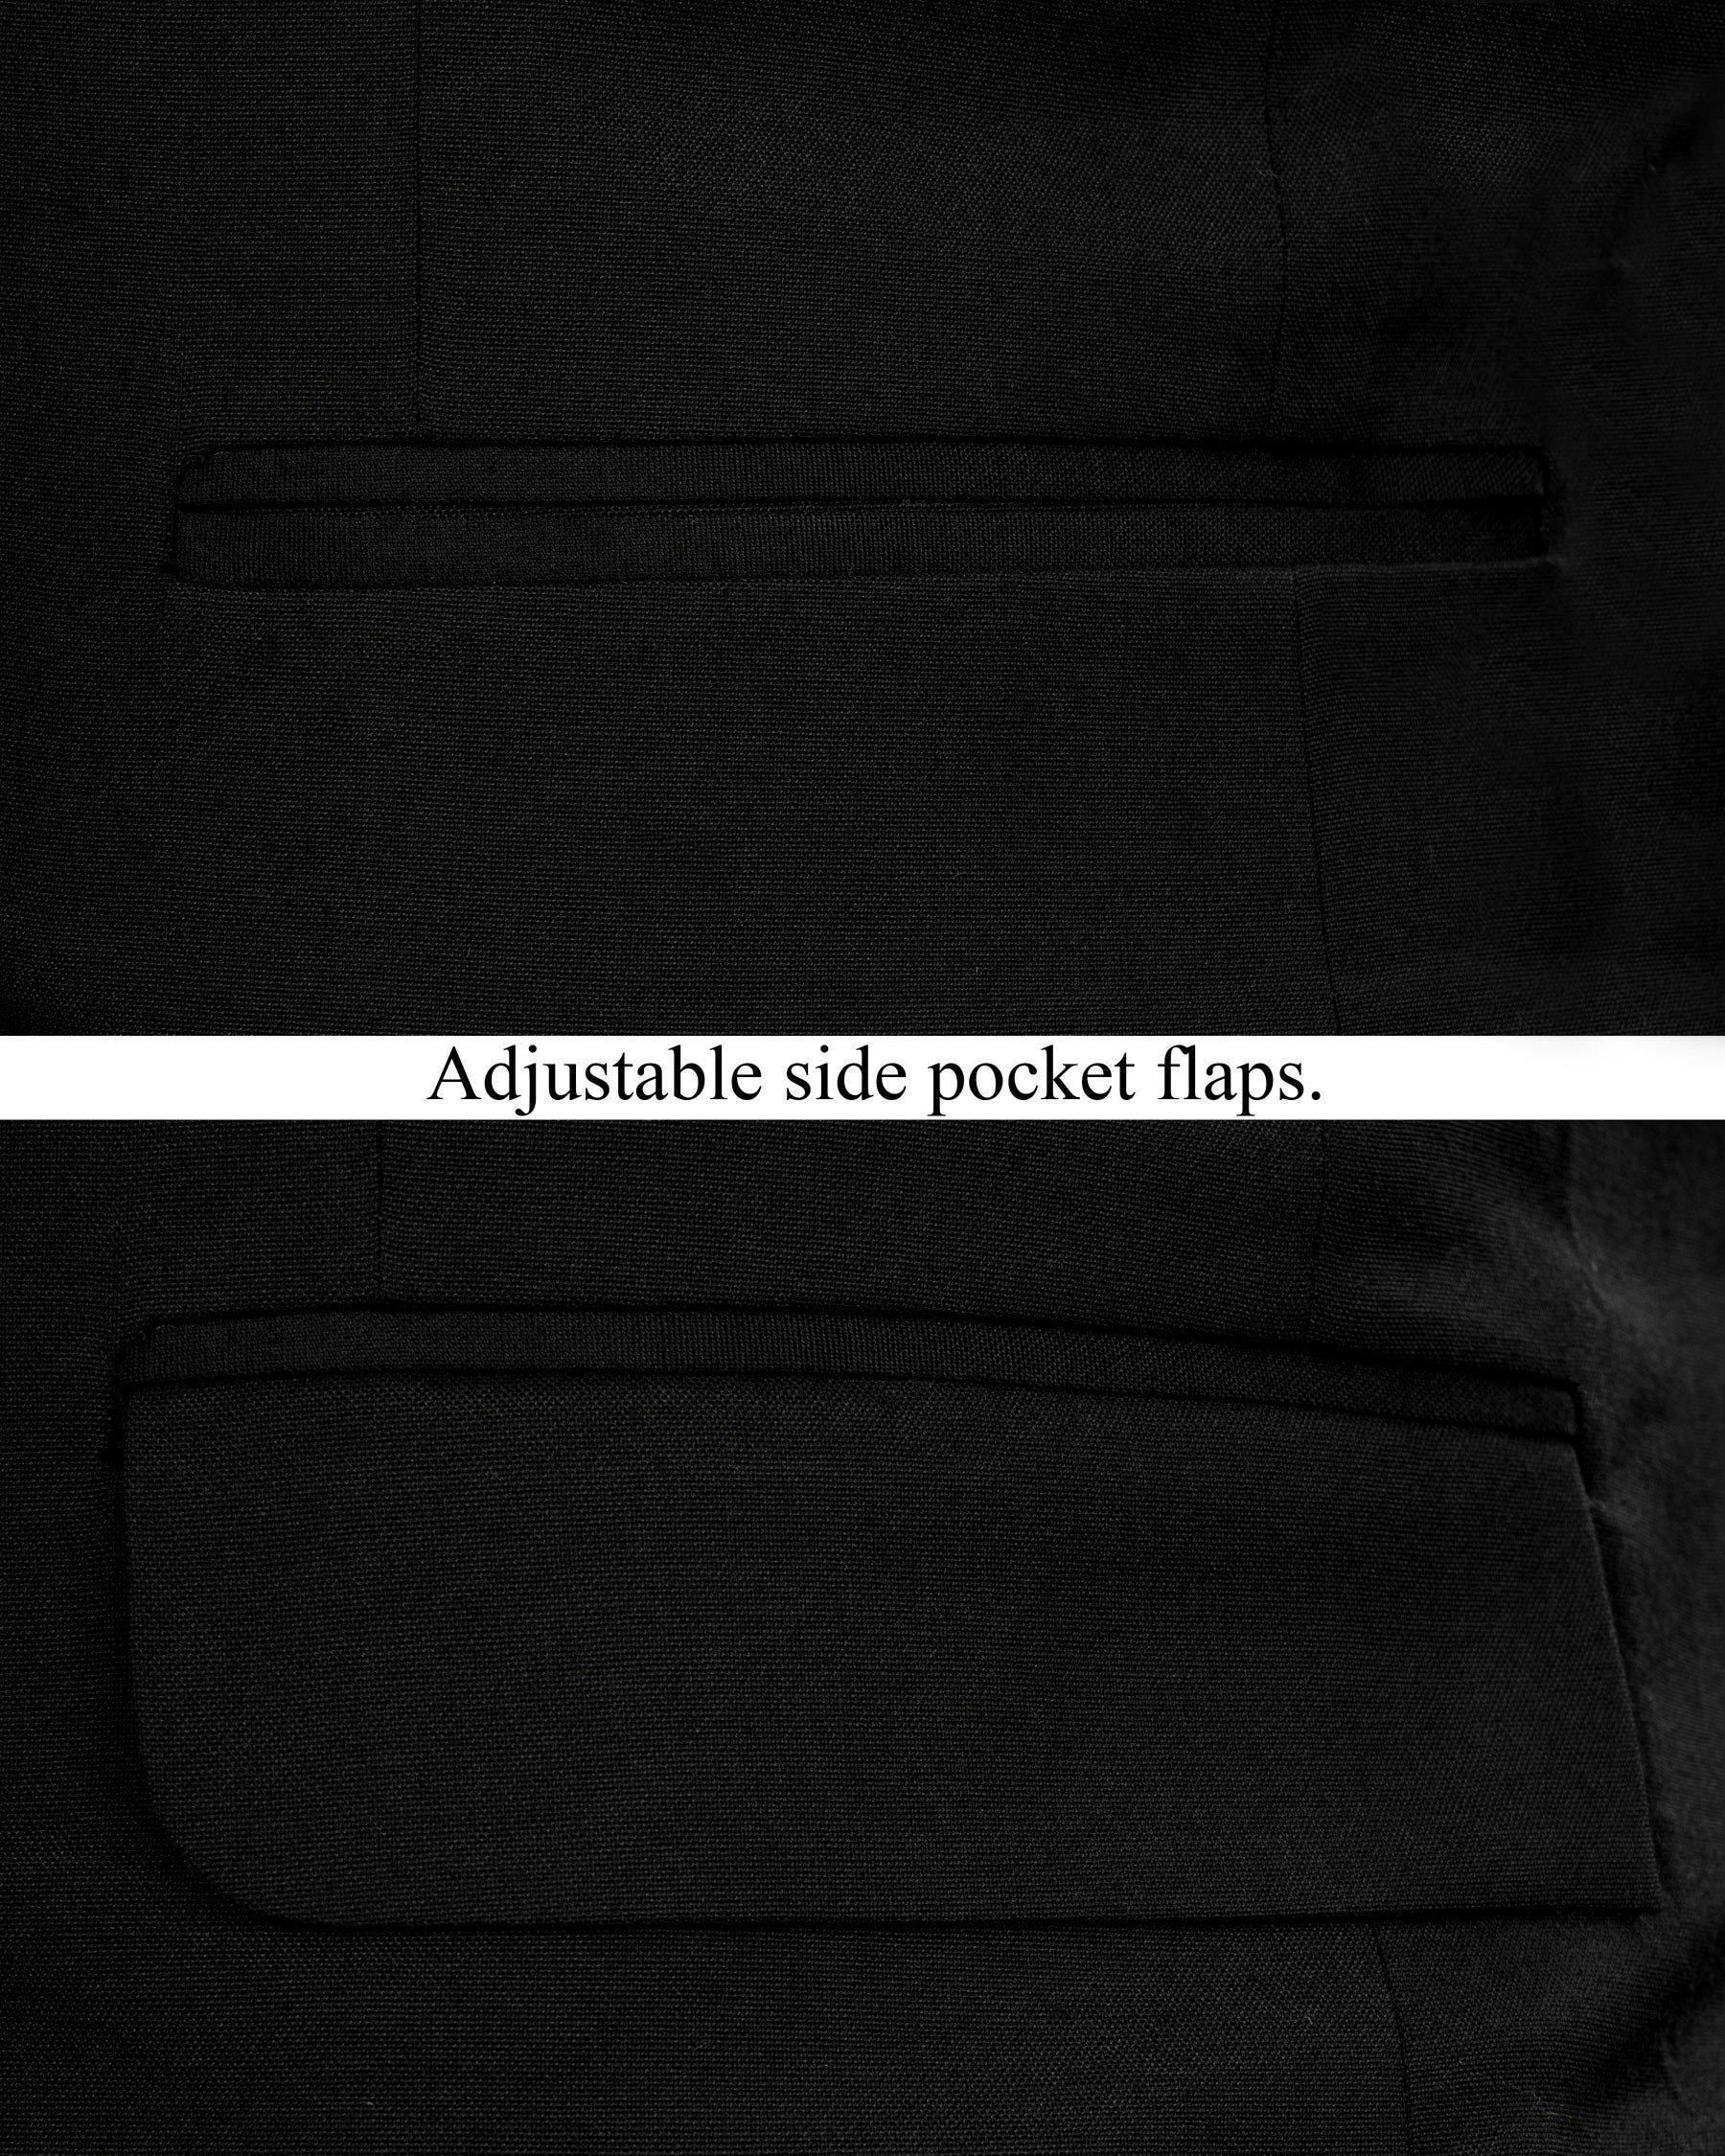 Jade Black Golden Buttons Double-Breasted Wool Rich Blazer BL1484-DB-GB-36, BL1484-DB-GB-38, BL1484-DB-GB-40, BL1484-DB-GB-42, BL1484-DB-GB-44, BL1484-DB-GB-46, BL1484-DB-GB-48, BL1484-DB-GB-50, BL1484-DB-GB-52, BL1484-DB-GB-54, BL1484-DB-GB-56, BL1484-DB-GB-58, BL1484-DB-GB-60